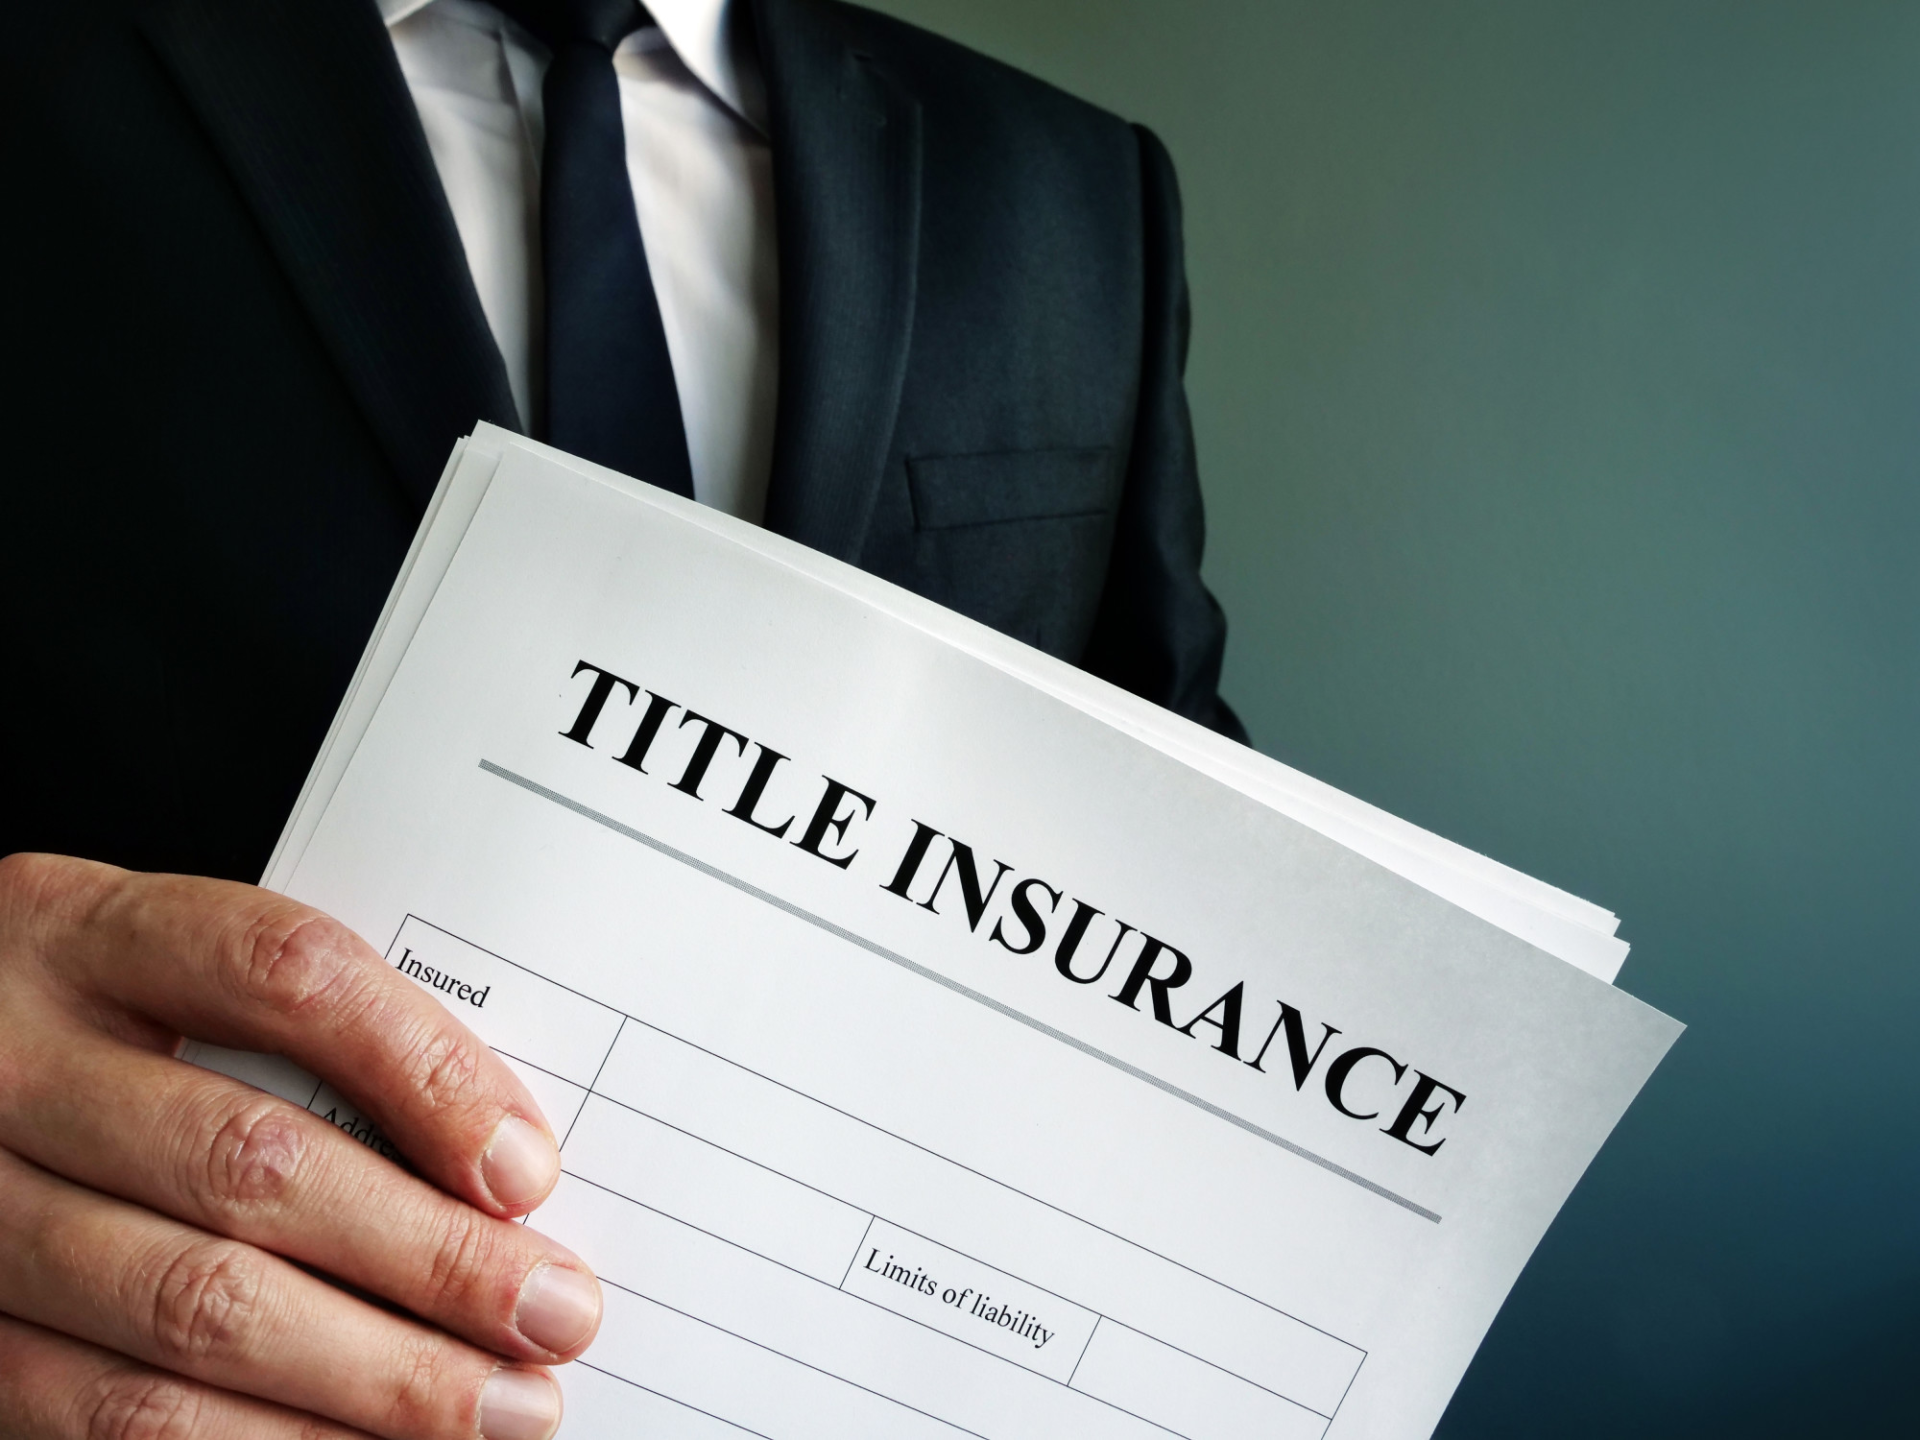 The survey is a Substitute For Title Insurance?